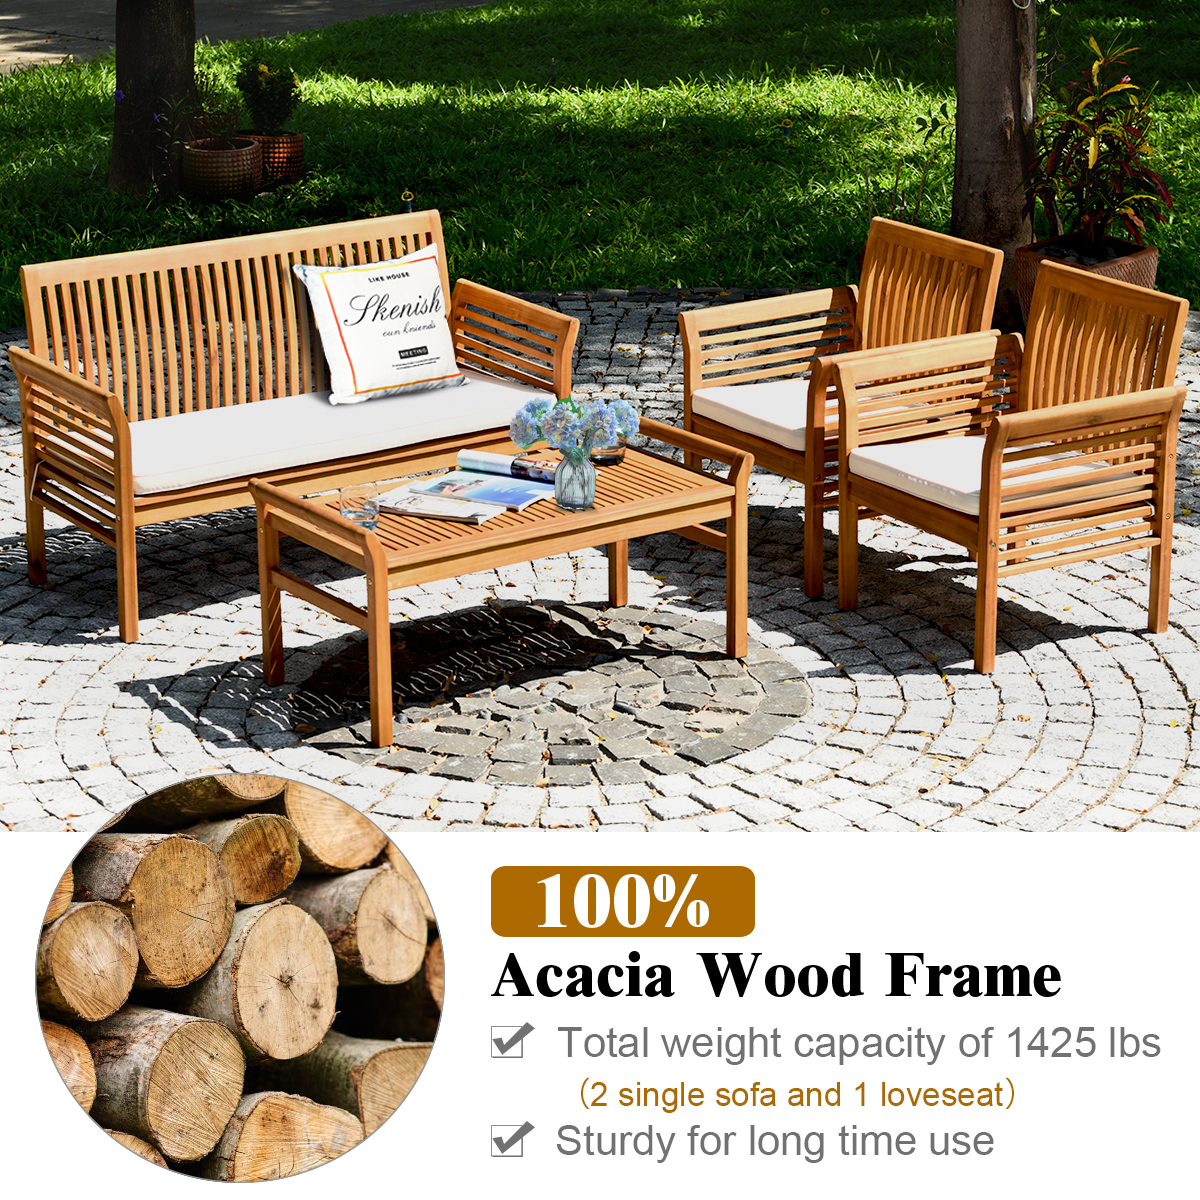 Costway 4 PCS Outdoor Acacia Wood Sofa Furniture Set Cushioned Chair Coffee Table Garden - image 4 of 10